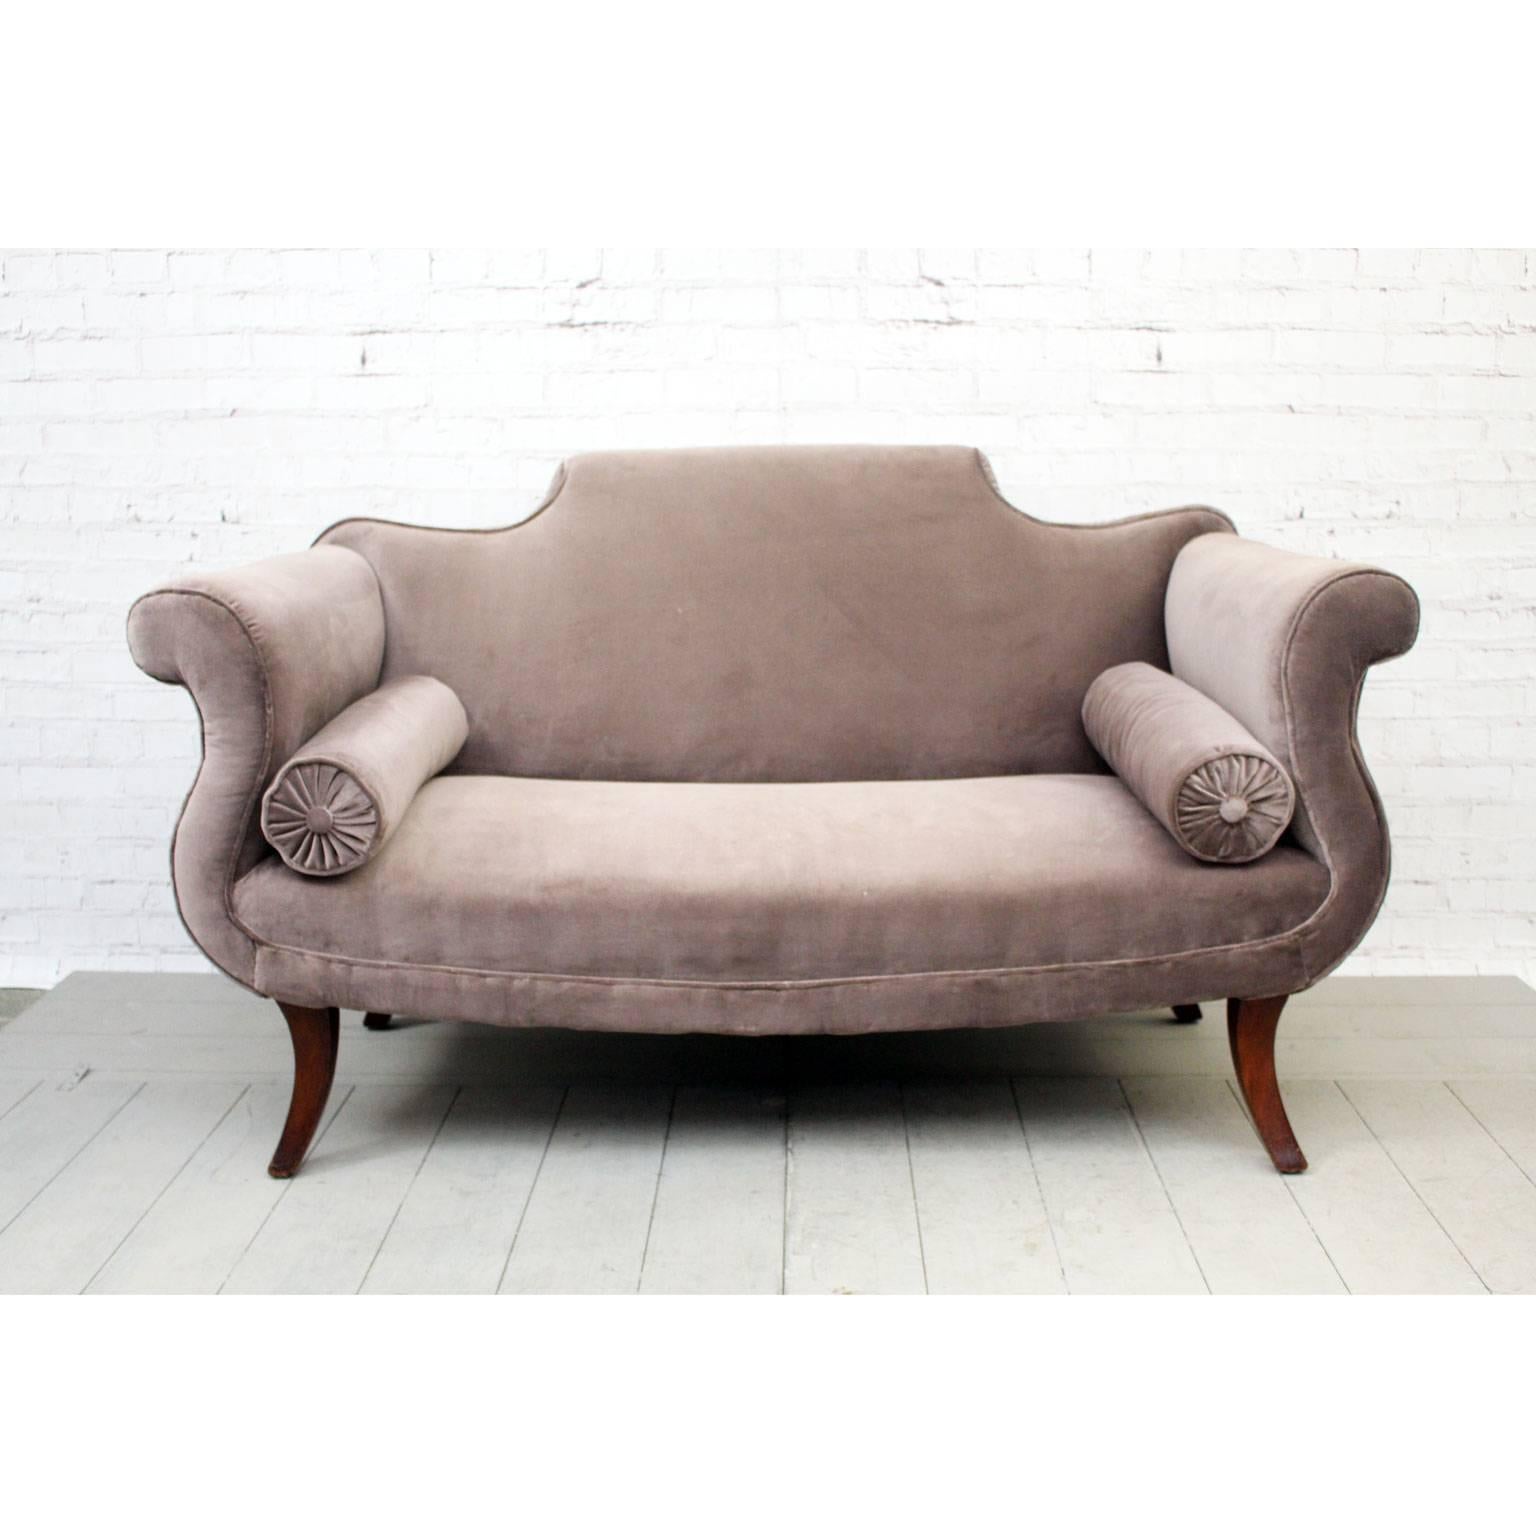 This superbly shaped Regency sofa is a thing of beauty. We love the sabre legs and curvaceous form. This is the perfect size to slot in a bedroom, a sitting room or a hallway.
Newly upholstered in mink velvet.